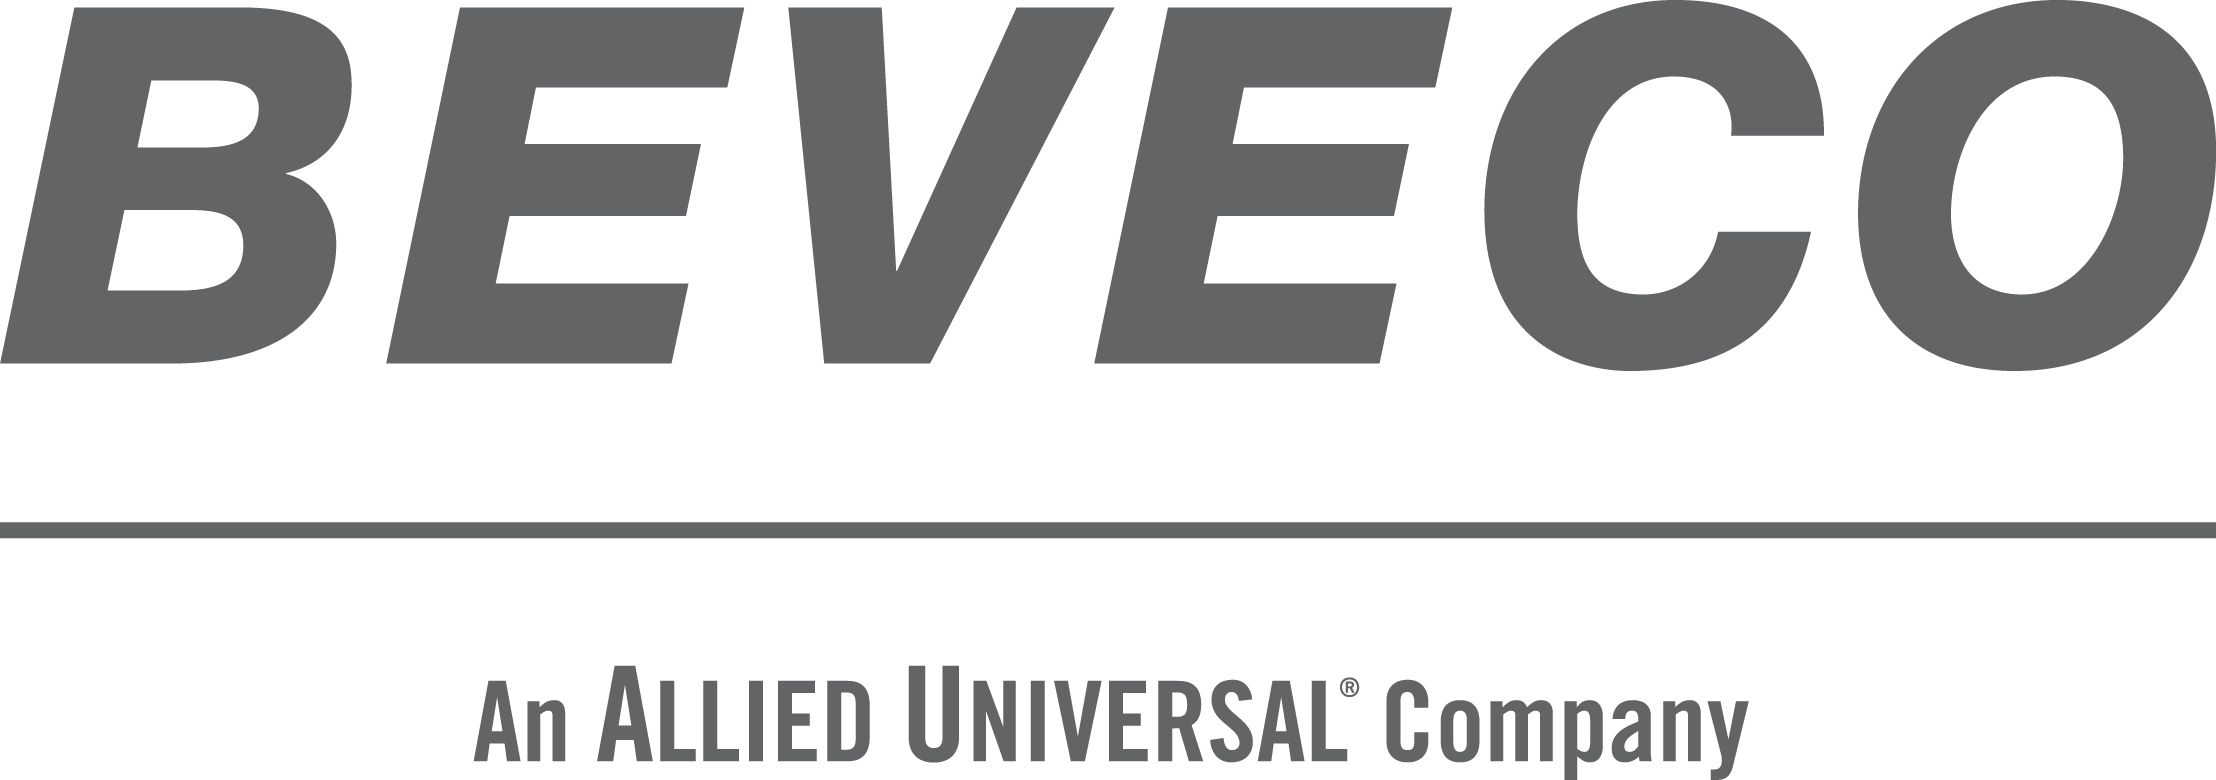 Beveco, an Allied Universal Company